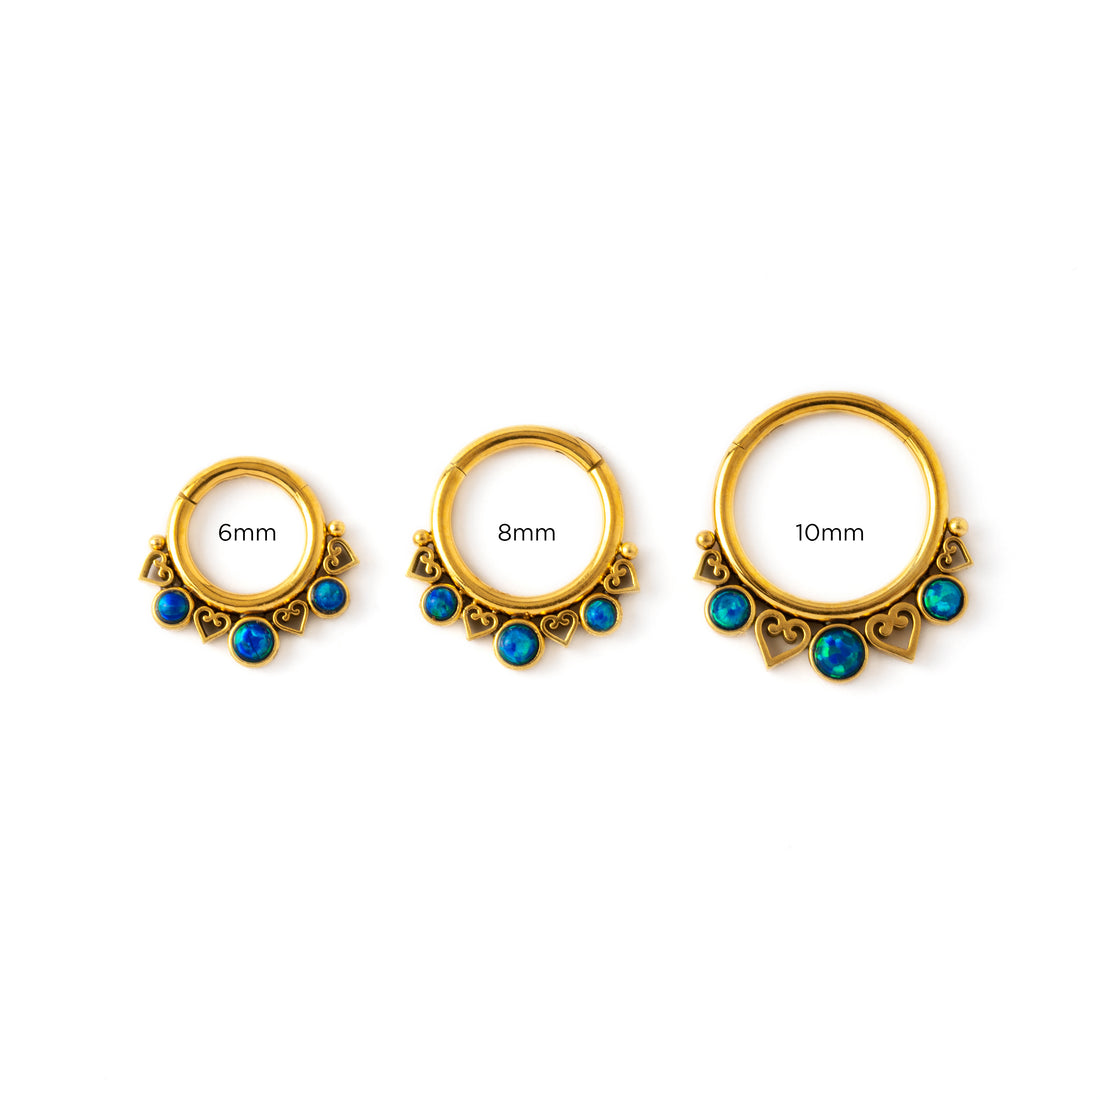 6mm, 8mm &amp; 10mm golden neptune septum clickers with trio blue opals frontal view